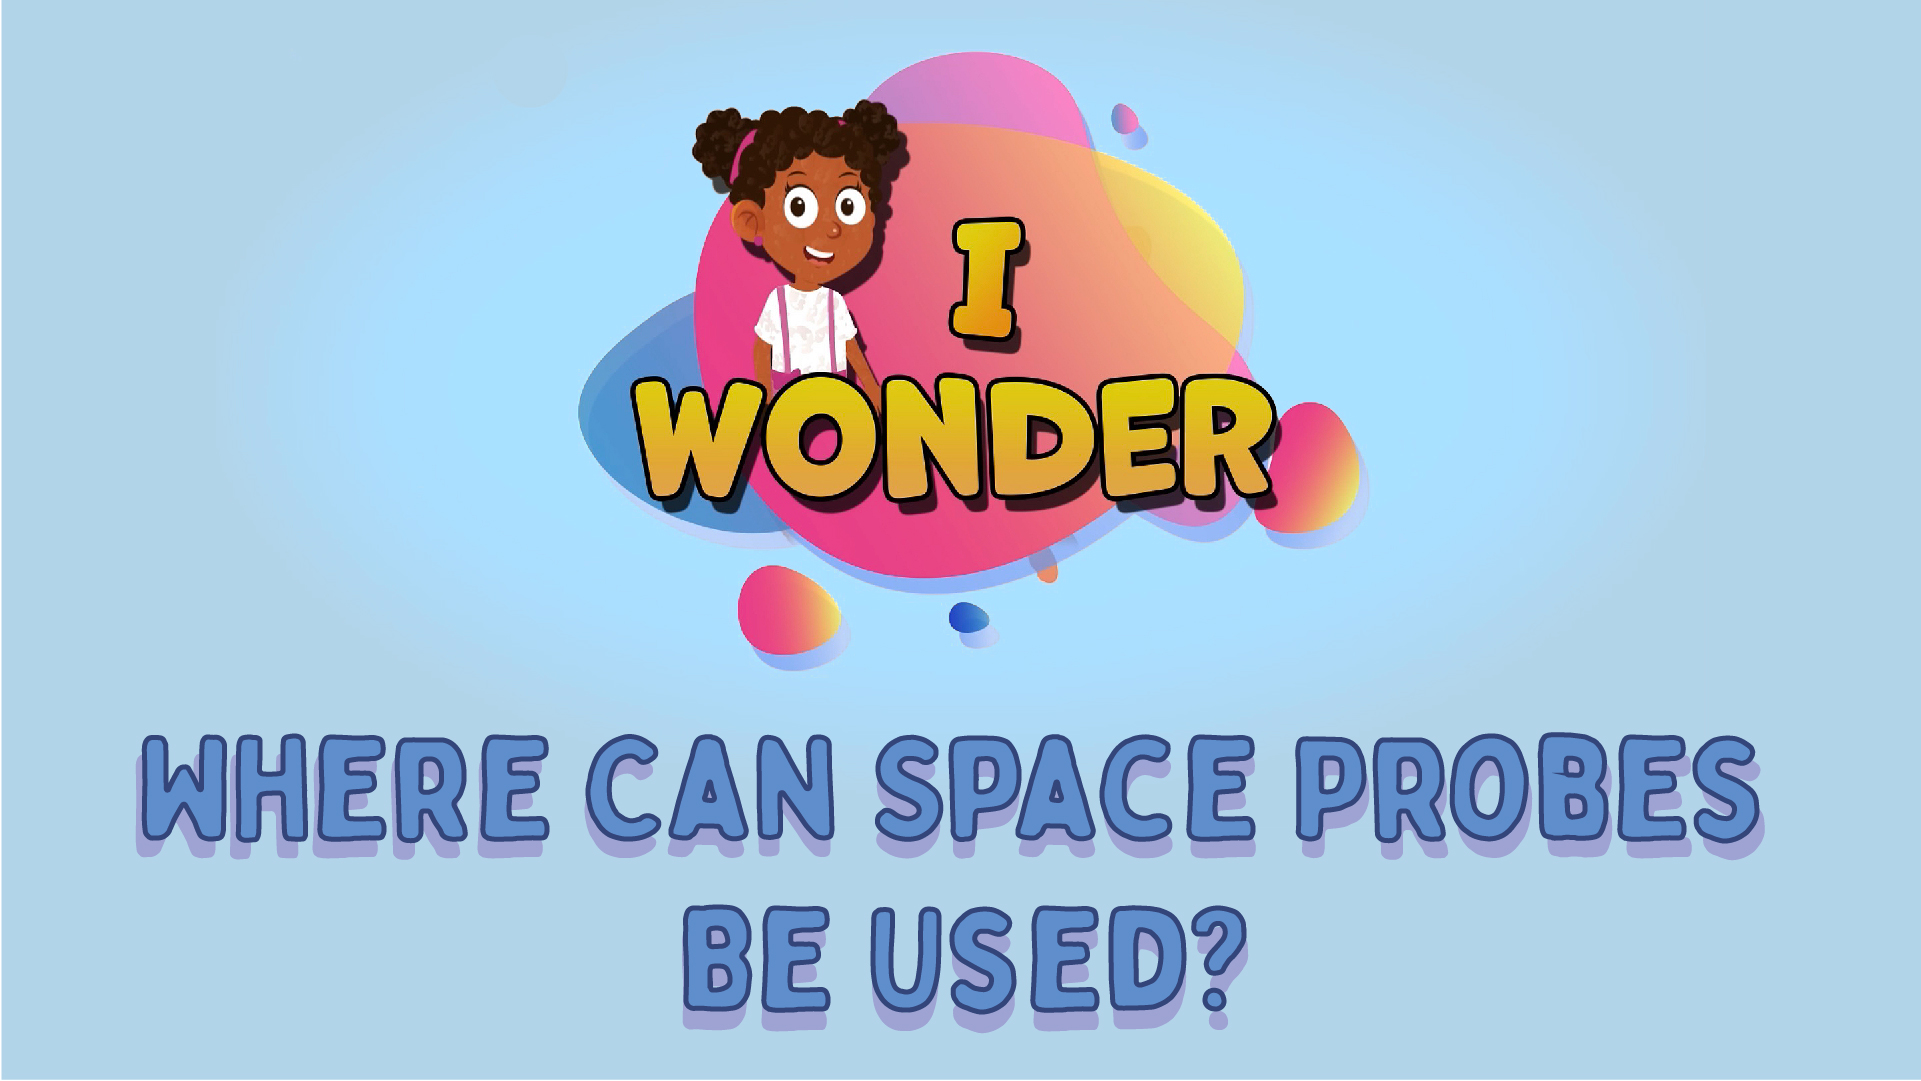 Where Can Space Probes Be Used?